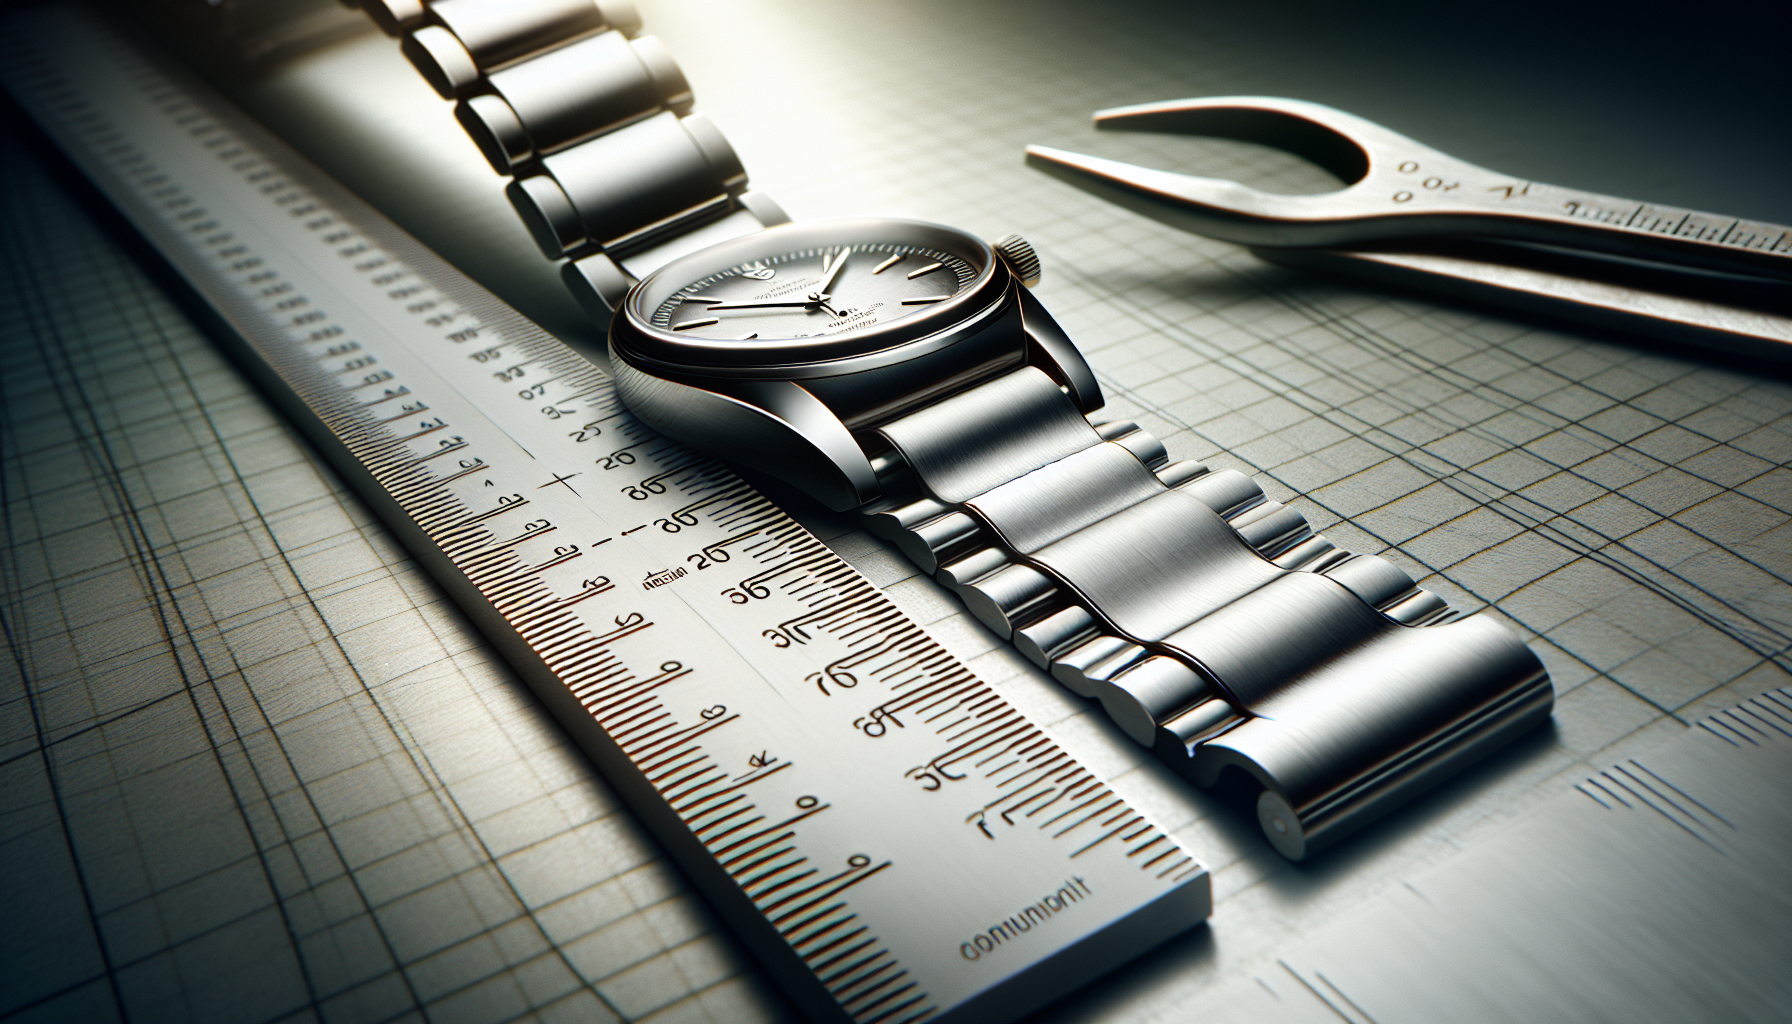 Illustration of a ruler measuring the lug width of a watch band